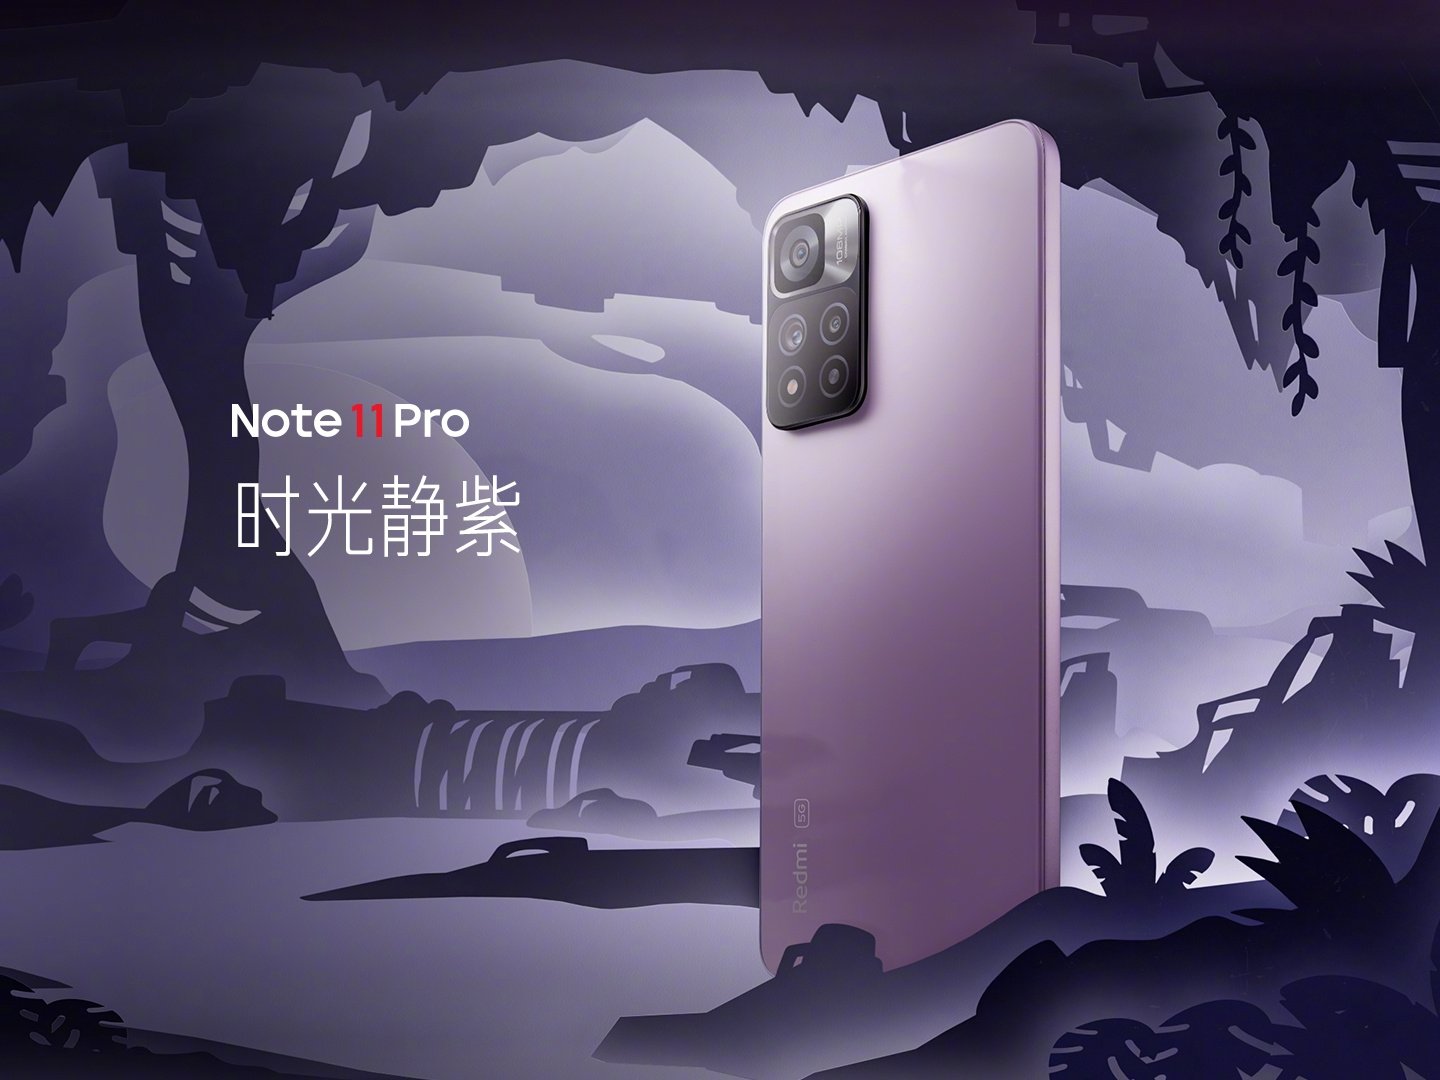 Xiaomi reveals the Redmi Note 11 Pro with a huge battery, 67 W